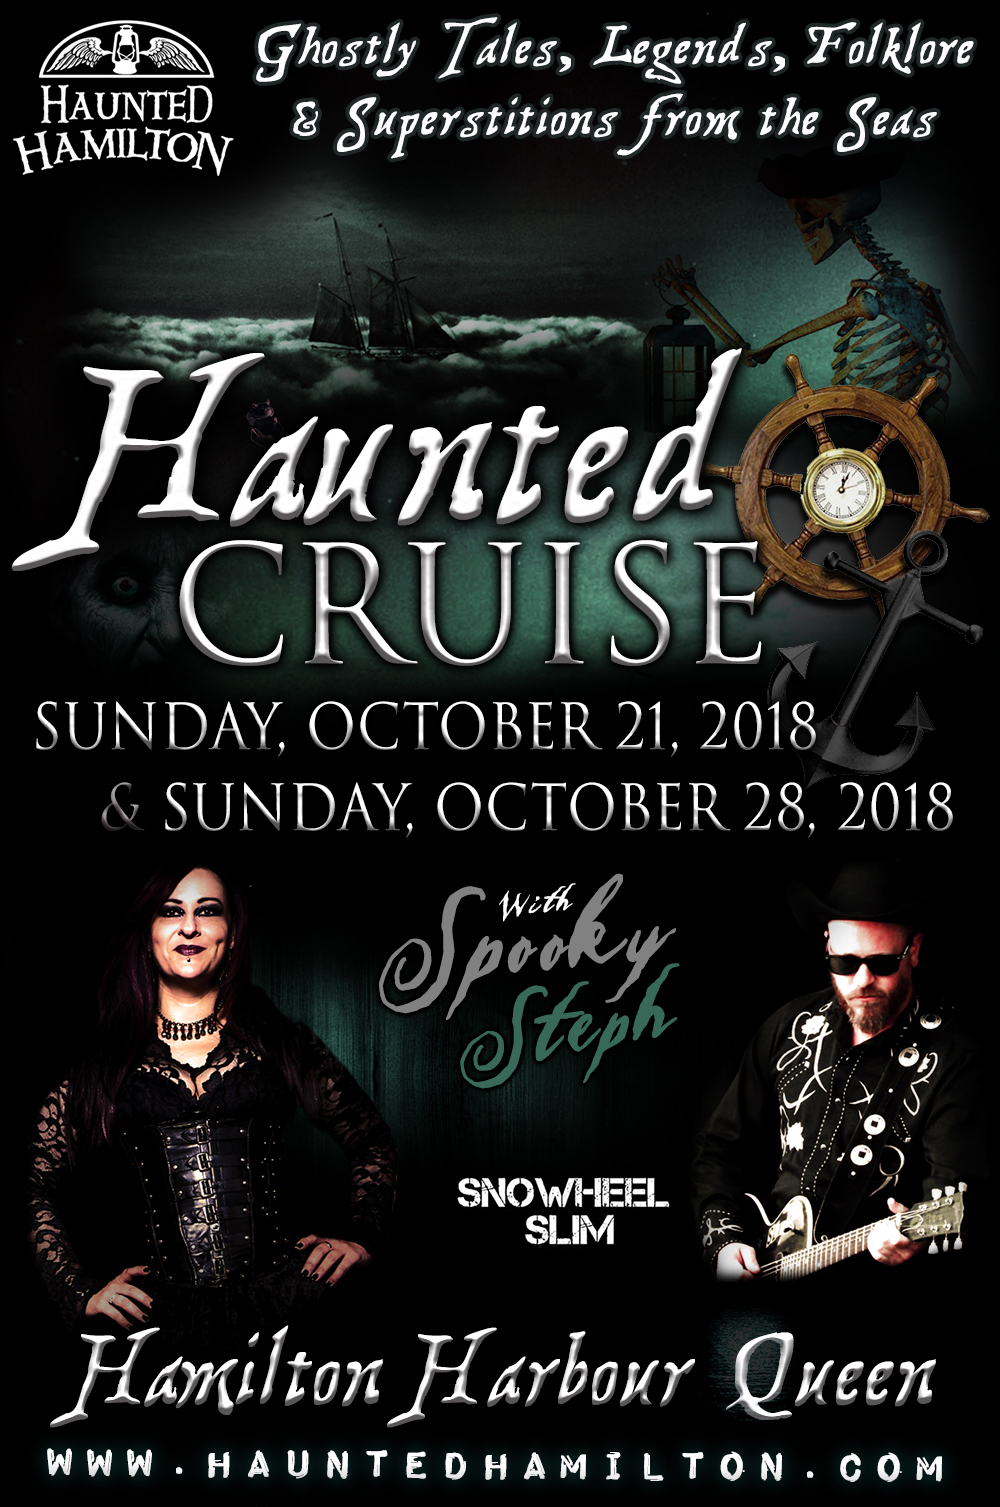 Haunted Hamilton presents a HAUNTED CRUISE Aboard the Hamilton Harbour Queen with Spooky Steph | Ghostly Tales, Legends, Folkore and Superstitions from the Seas | The Great Lakes with its dramatic and mysterious past, span thousands of miles and sometimes cross through the veil into the spirit world, creating a rich legacy of myth, folklore, legends and tales of the unexplained. Learn about the tortured history of the men who have sailed these great lakes and the vessels that have carried them. Hear stories of haunted lighthouses, ghost ships, phantom lights and superstitions! All of this as you journey at twilight through time, across the waters of Hamilton Harbour! www.HauntedHamilton.com